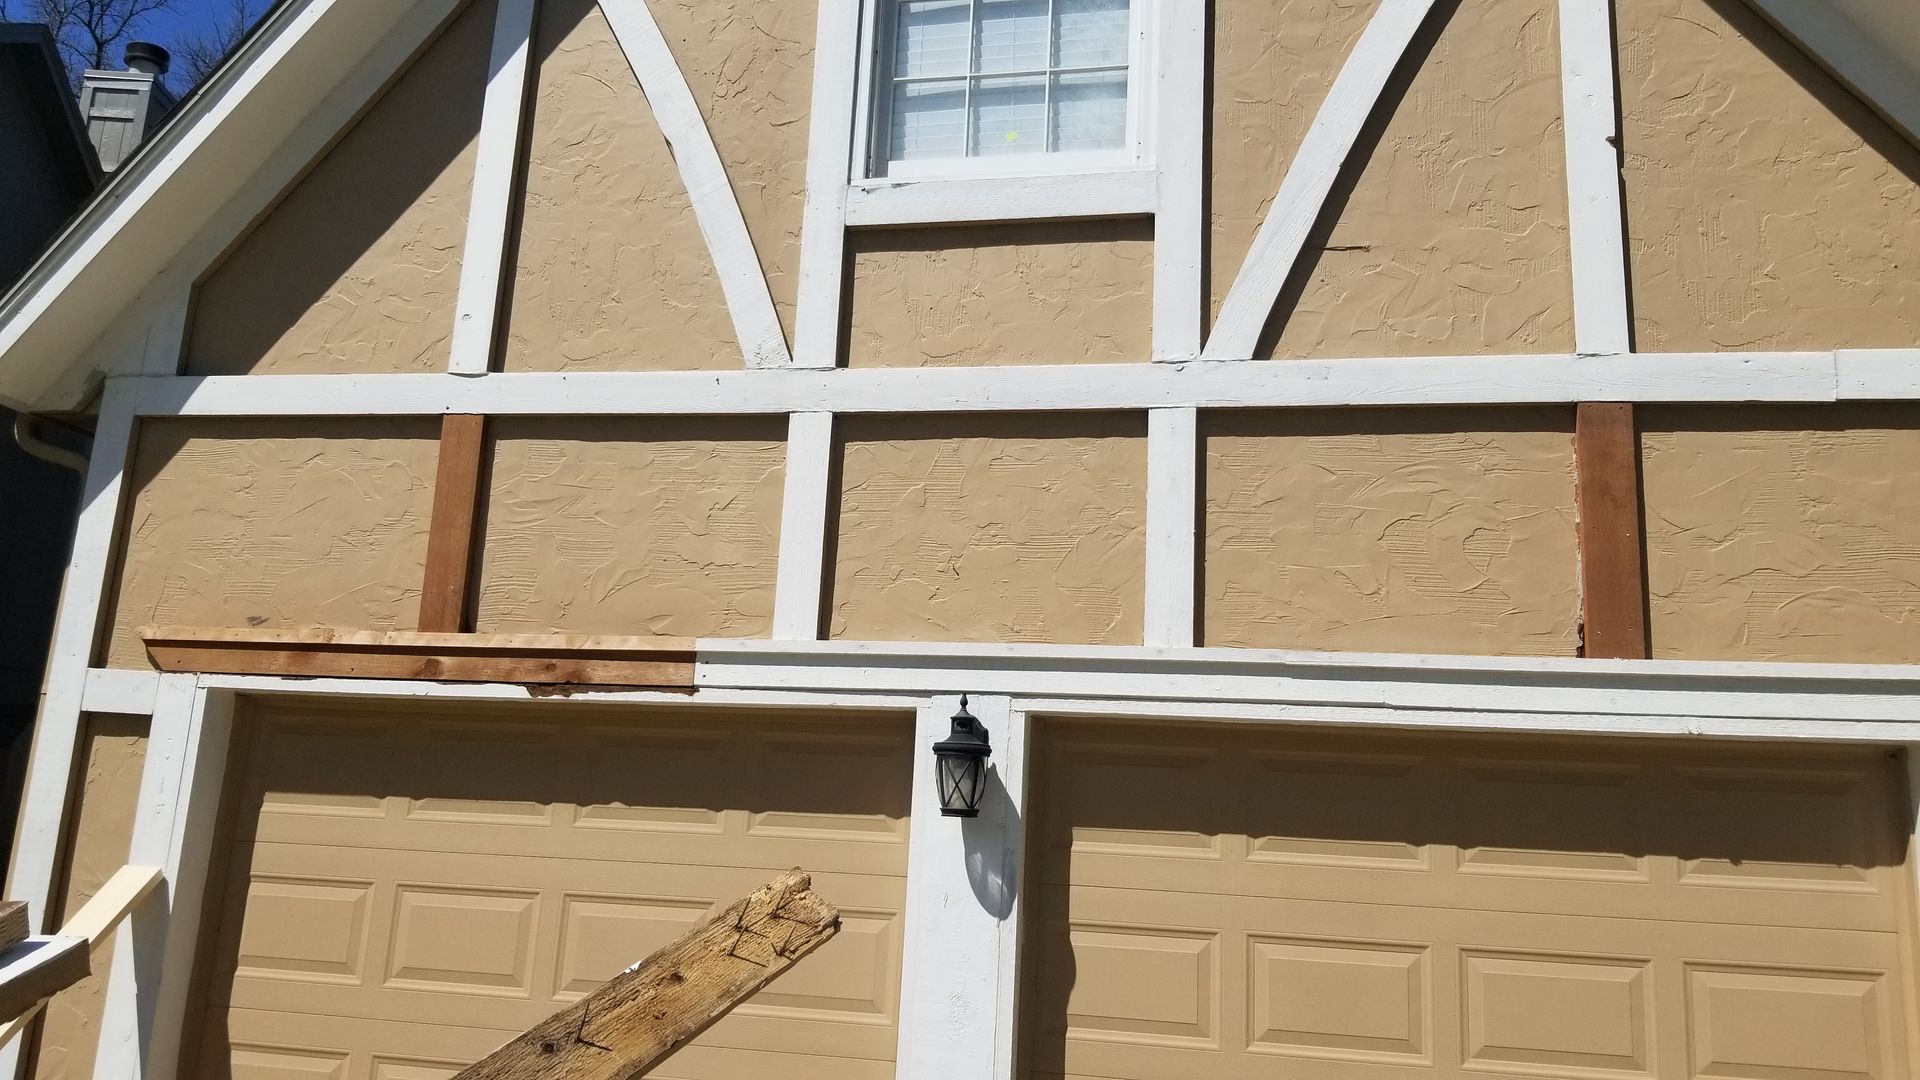 new wood trim installed on exterior of house in lenexa ks by home pros painting